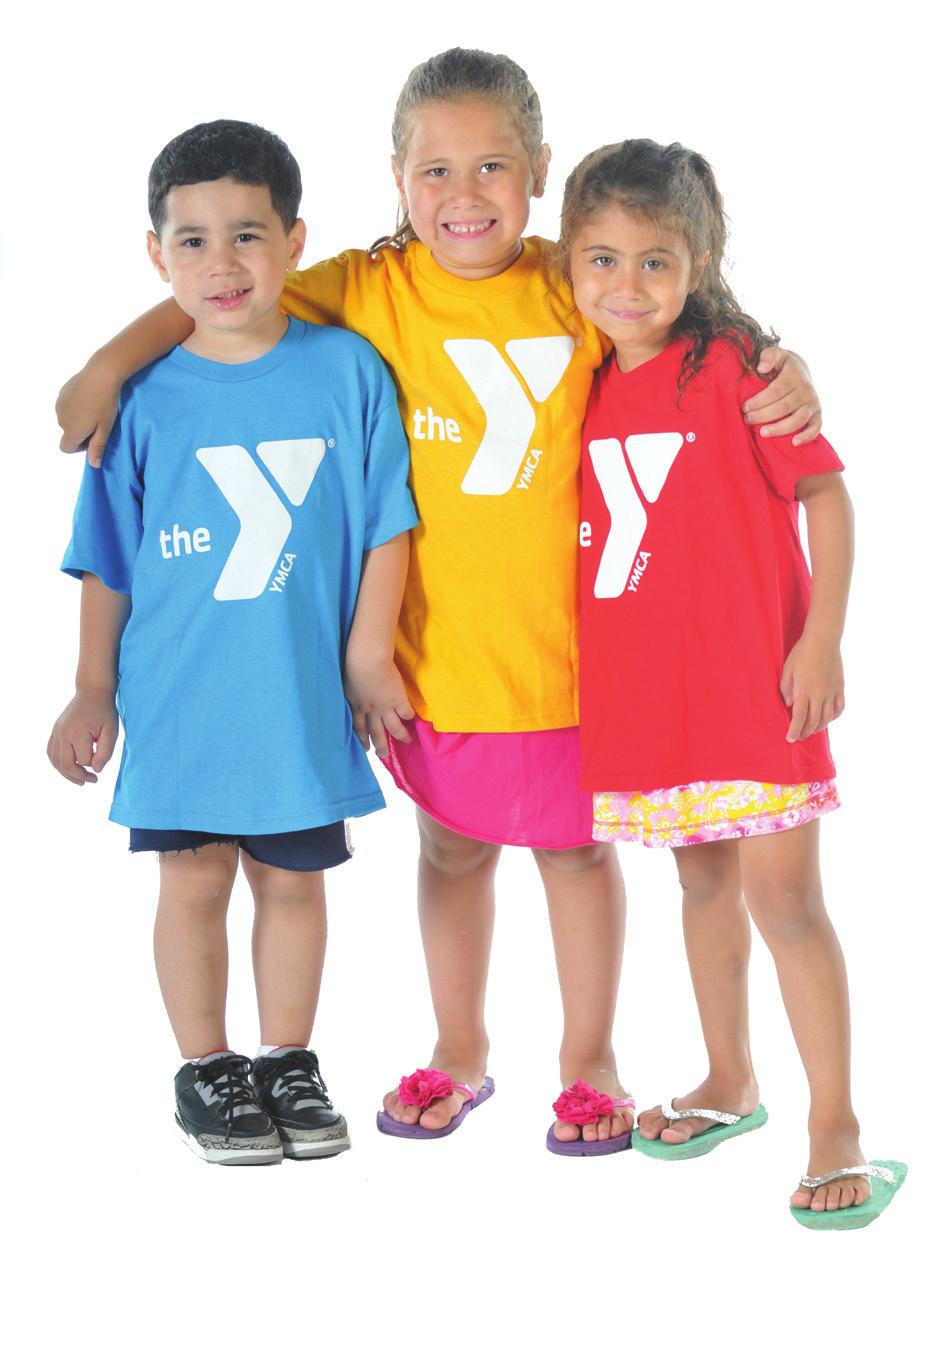 WE RE READY FOR A SUMMER OF GROWTH AND FUN! In 1885 the YMCA helped to invent summer camp to provide children with positive and fun experiences that build confidence and new friendships.